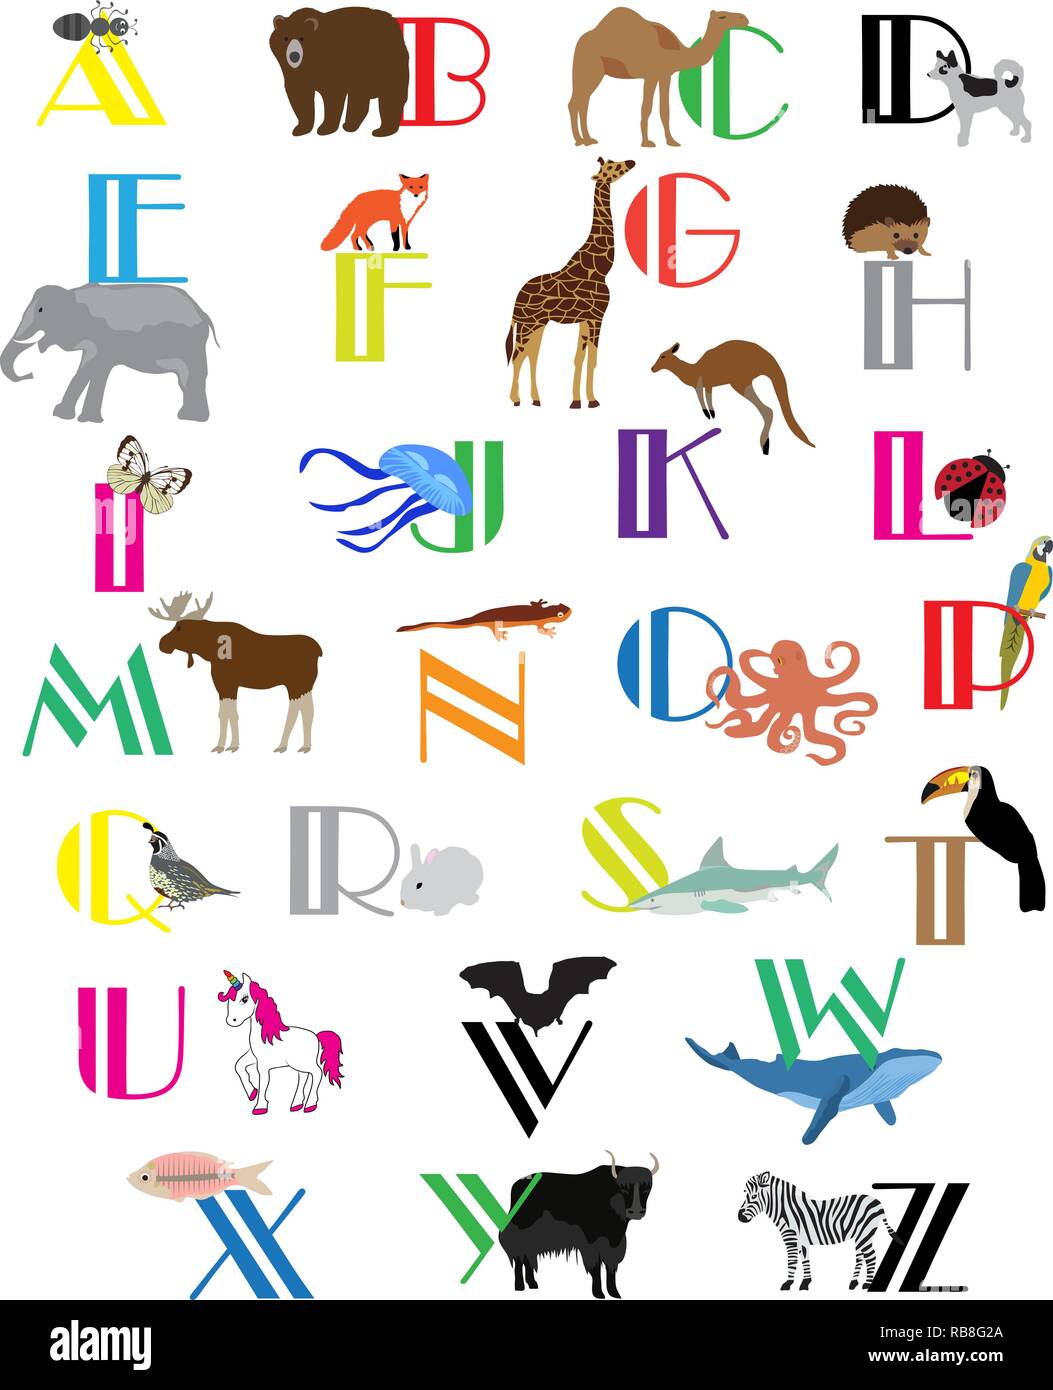 vector illustration of alphabet letters with animals. Stock Vector